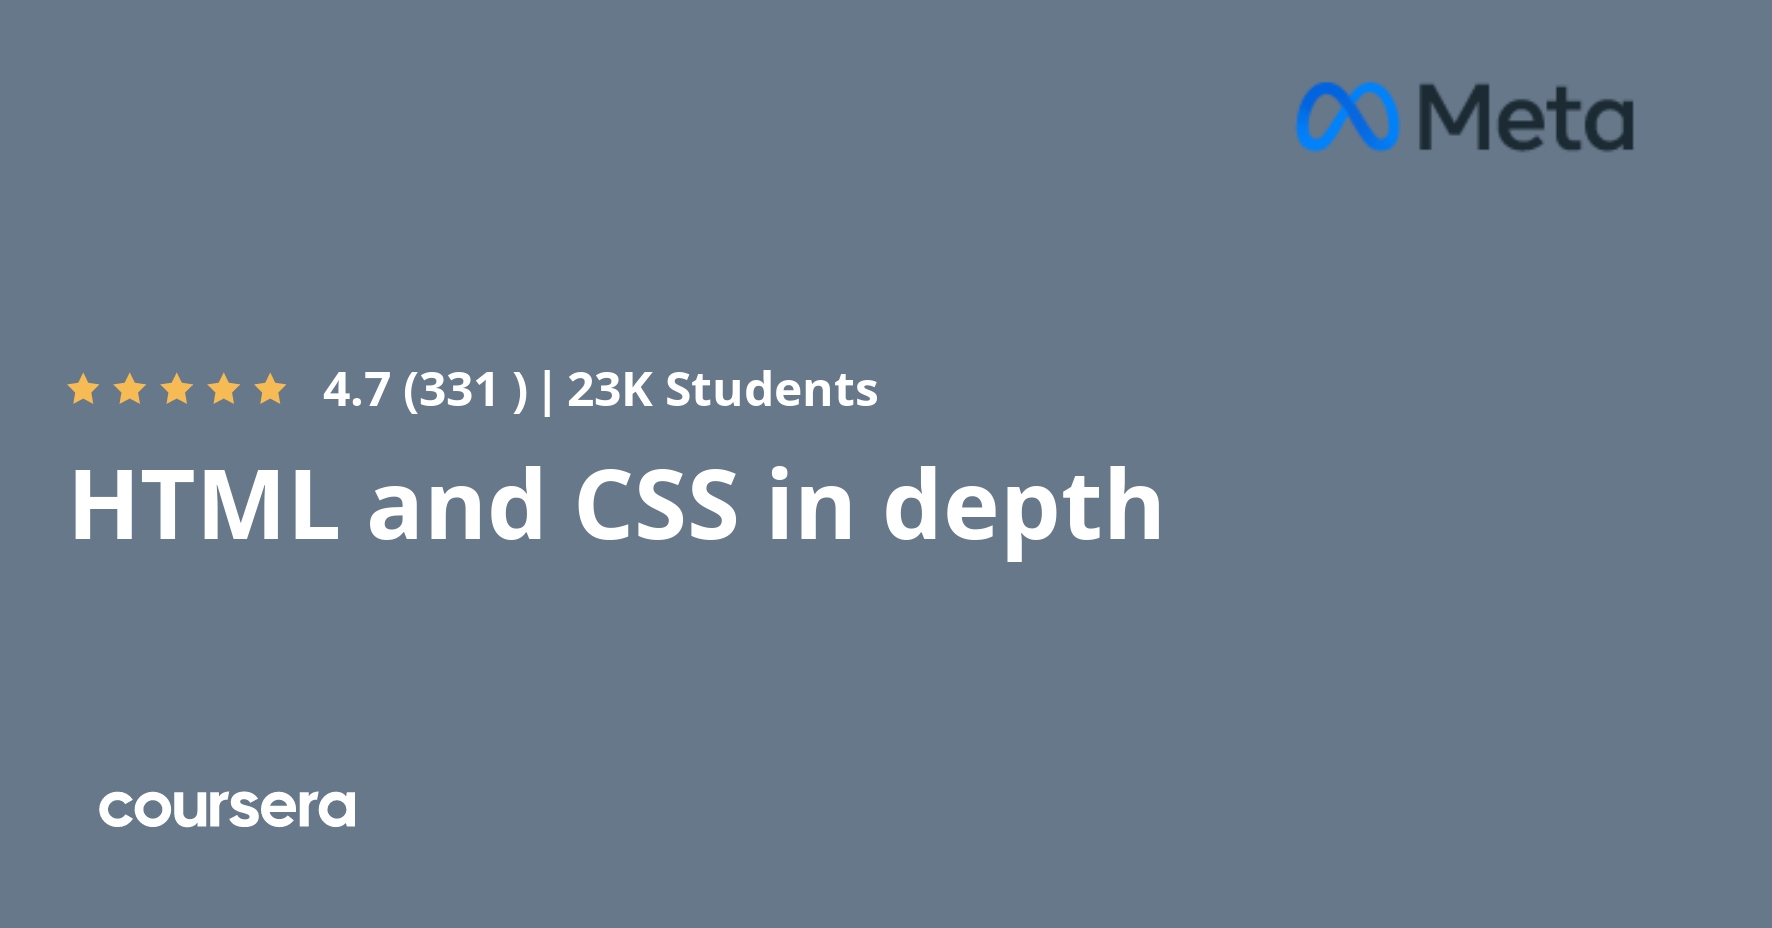 html and css in depth coursera peer graded assignment